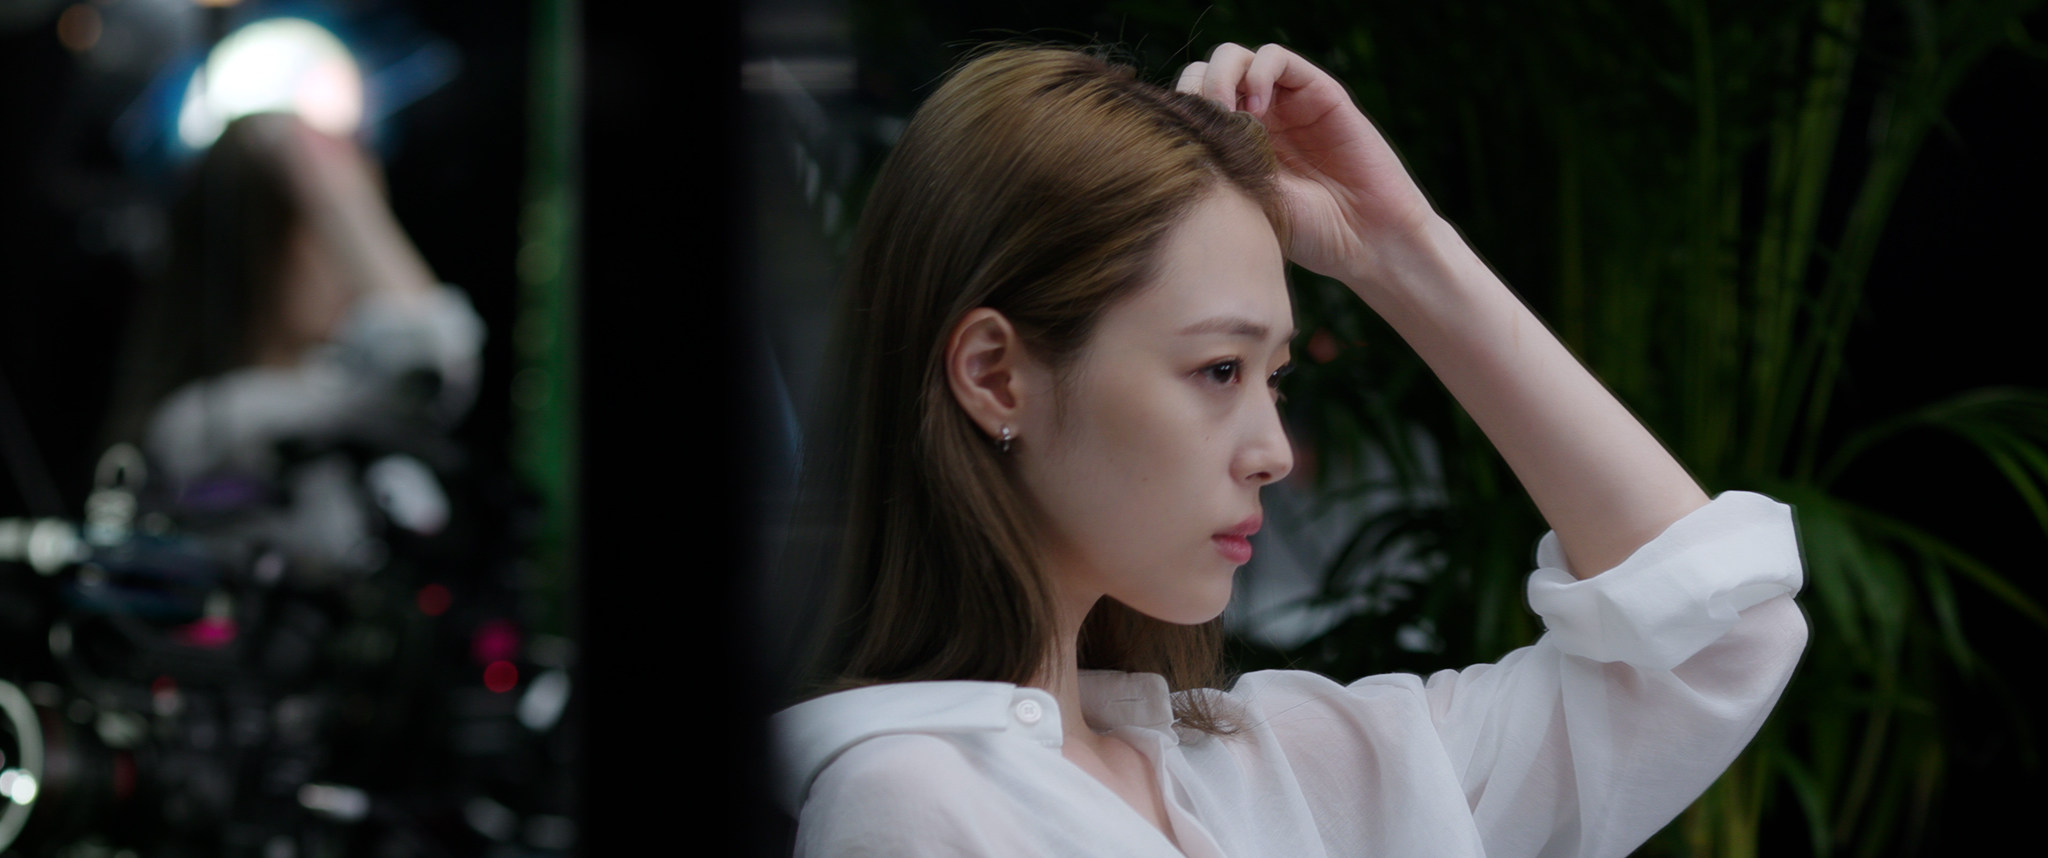 K-pop singer Sulli in a still from “Dear Jinri”. Jung Yoon-suk’s heartbreaking documentary is built around the final interview given by the f(x) group member.